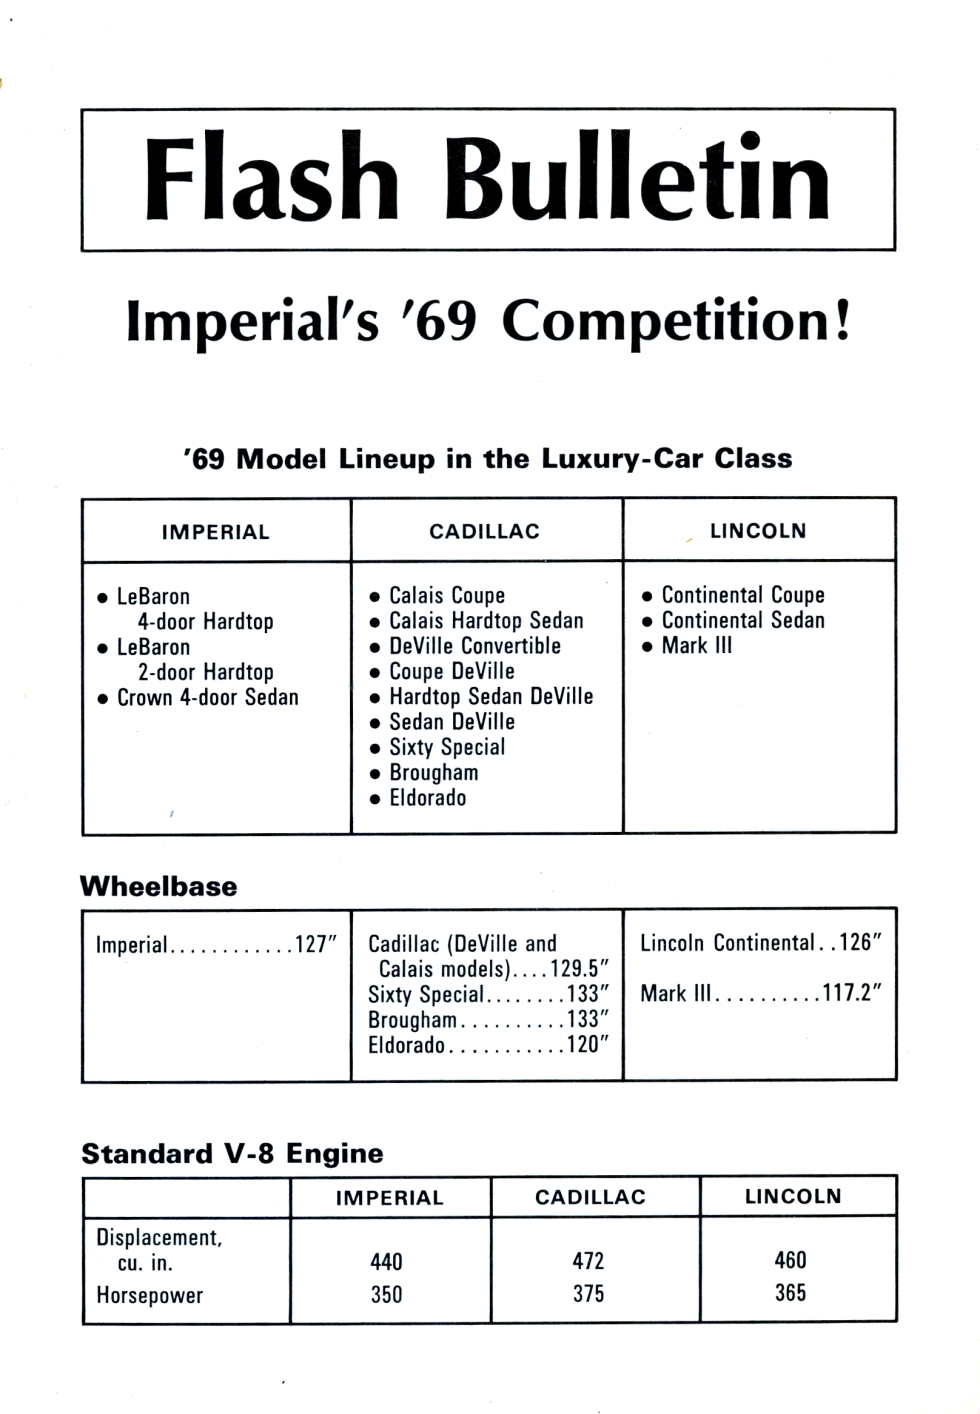 1969 Chrysler Imperial Competition Page 3